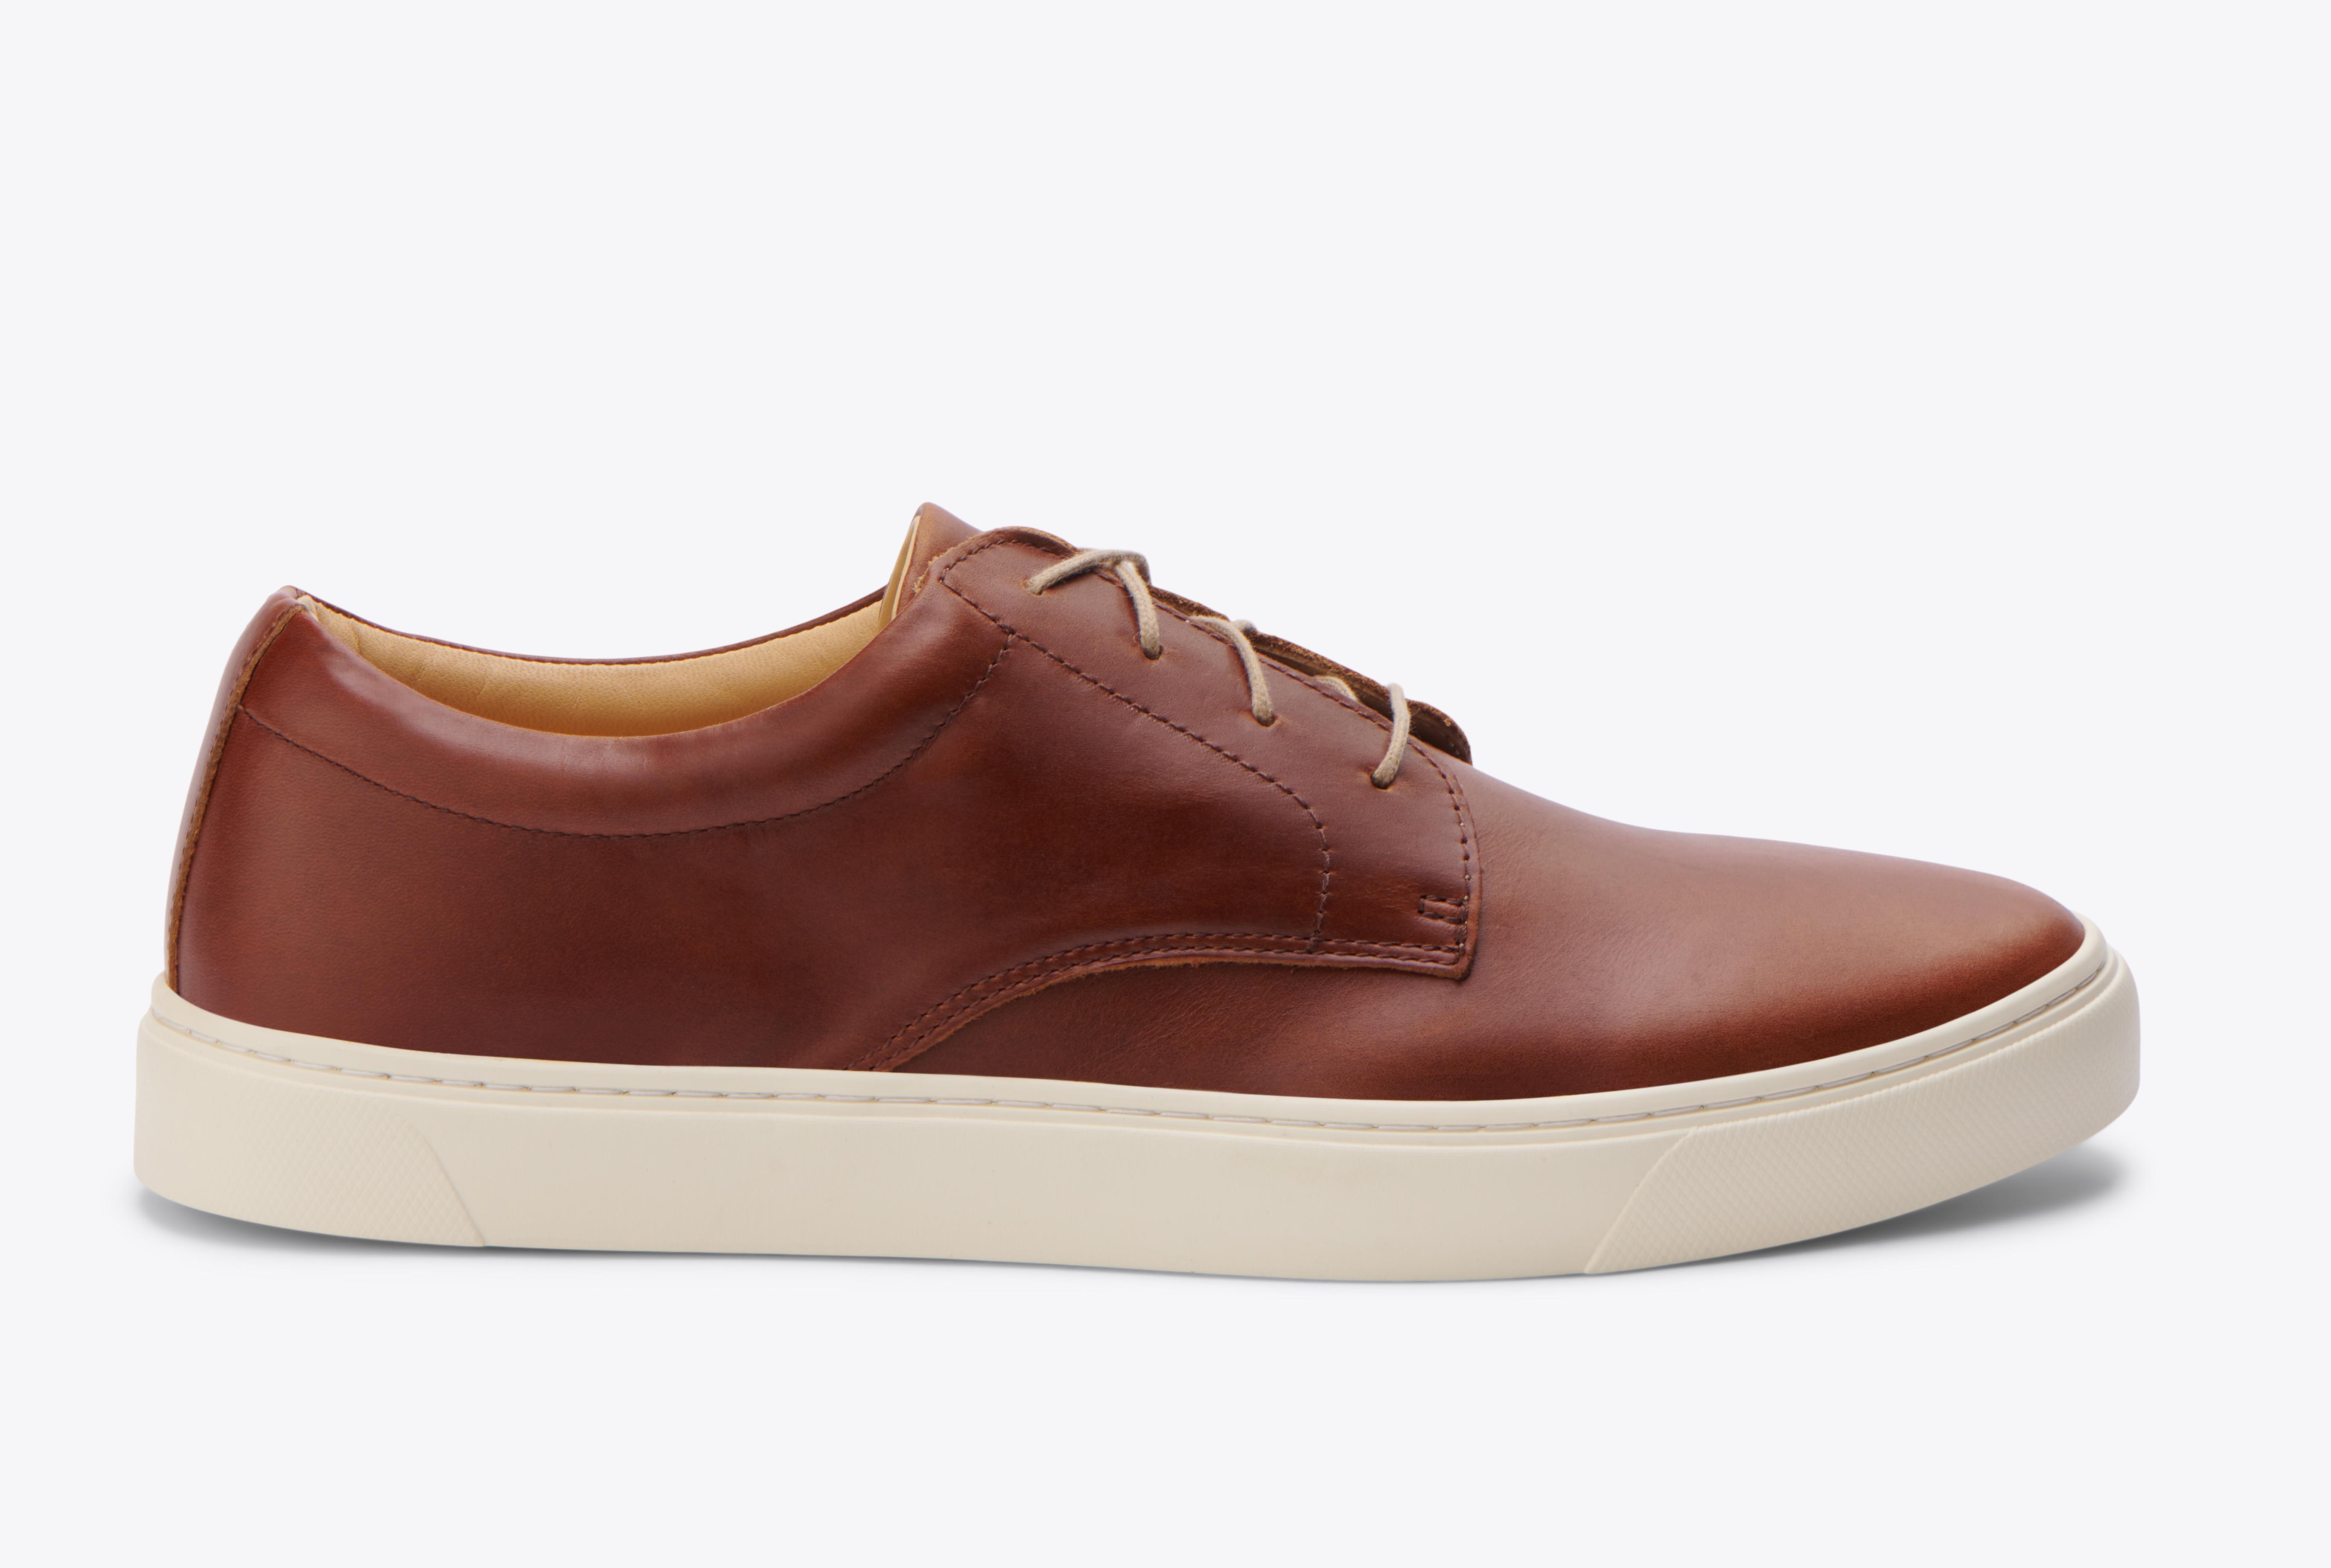 Nisolo Everyday Low Top Sneaker Brandy - Every Nisolo product is built on the foundation of comfort, function, and design. 